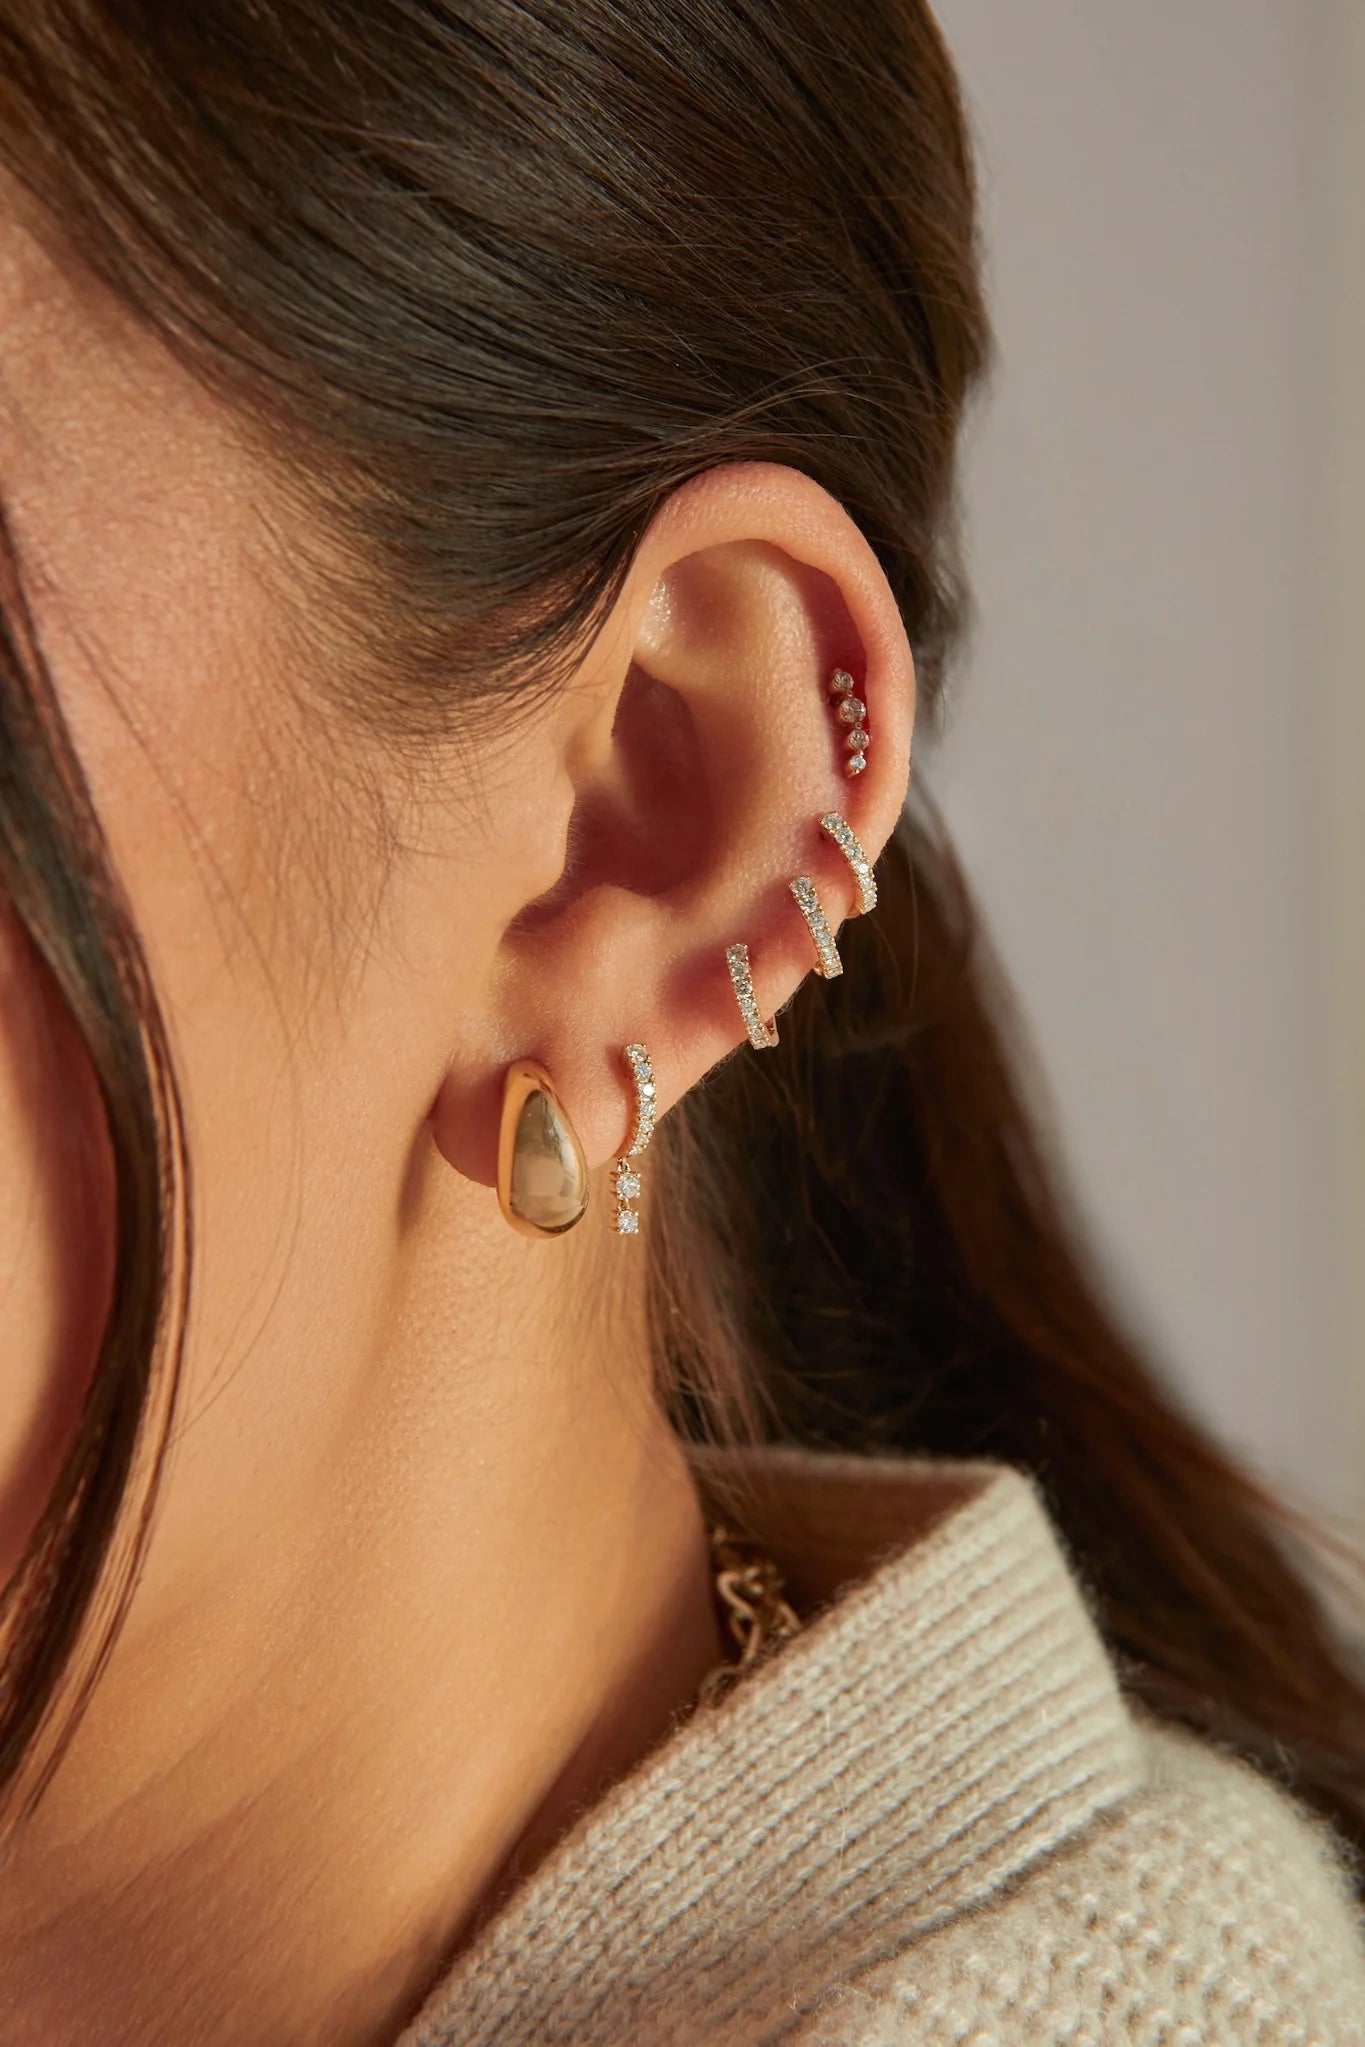 EF Collection 14k yellow gold earrings with diamonds styled on ear lobe of model